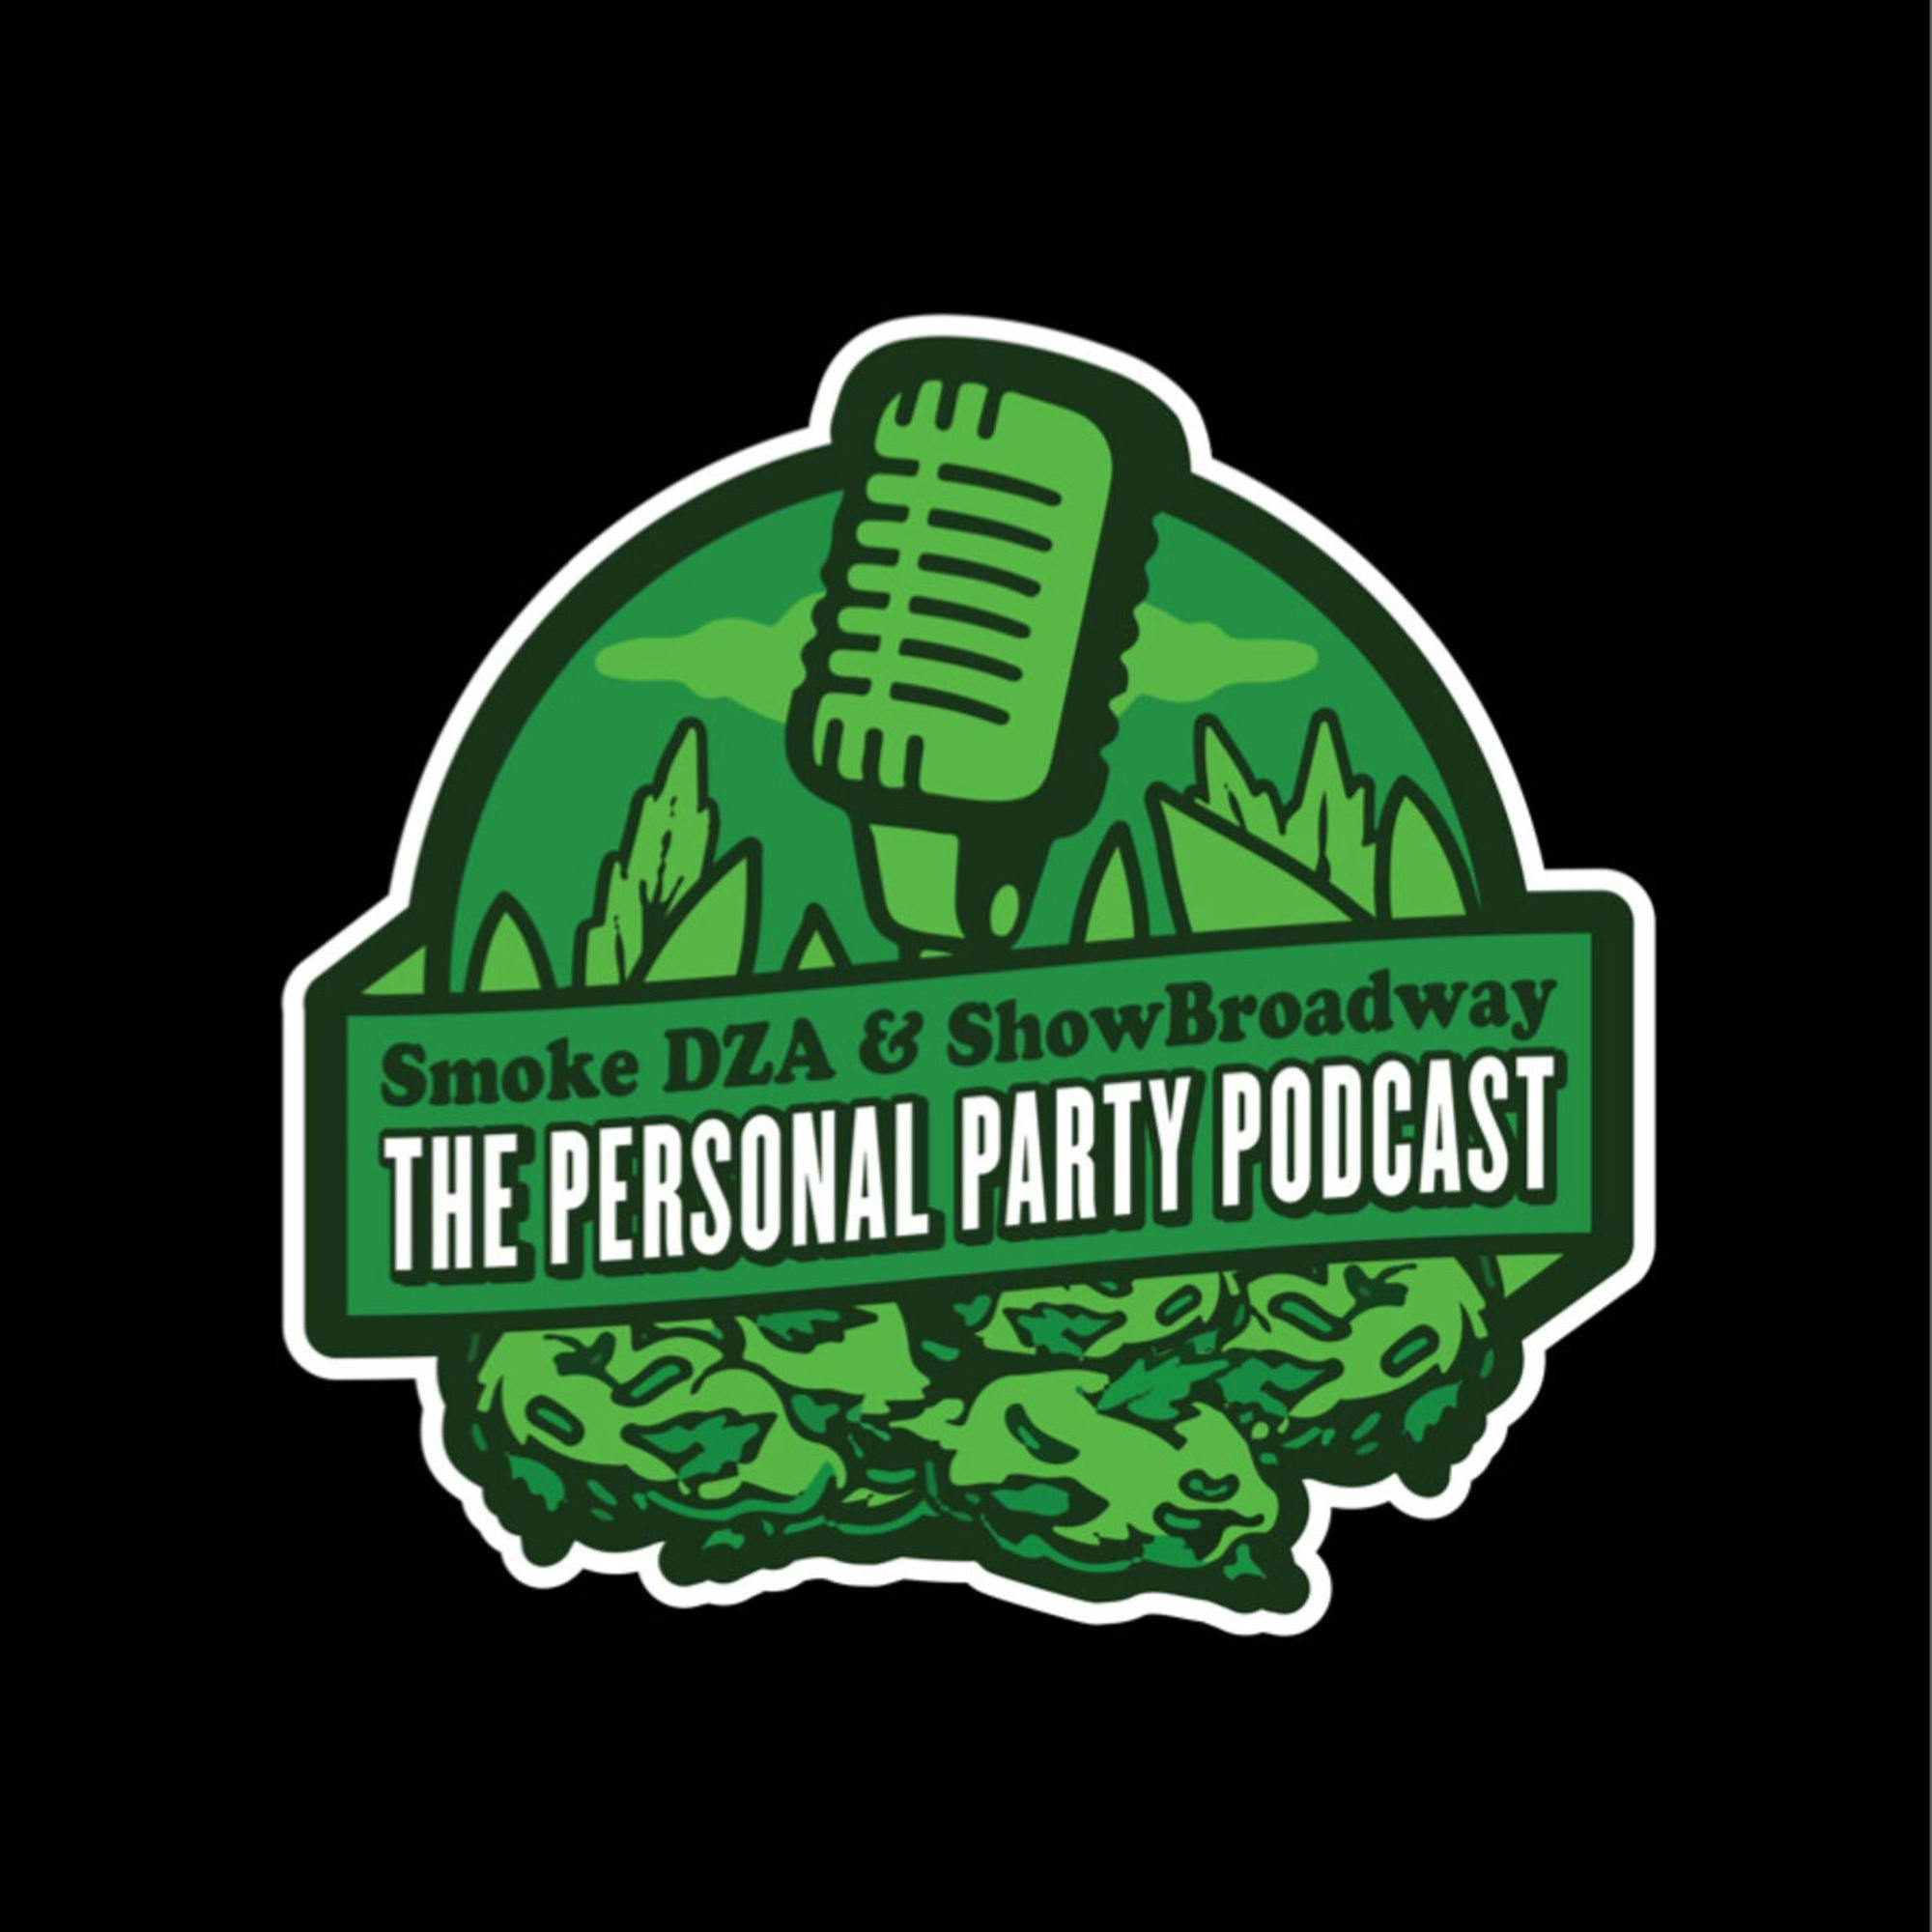 The Personal Party Podcast Album Art